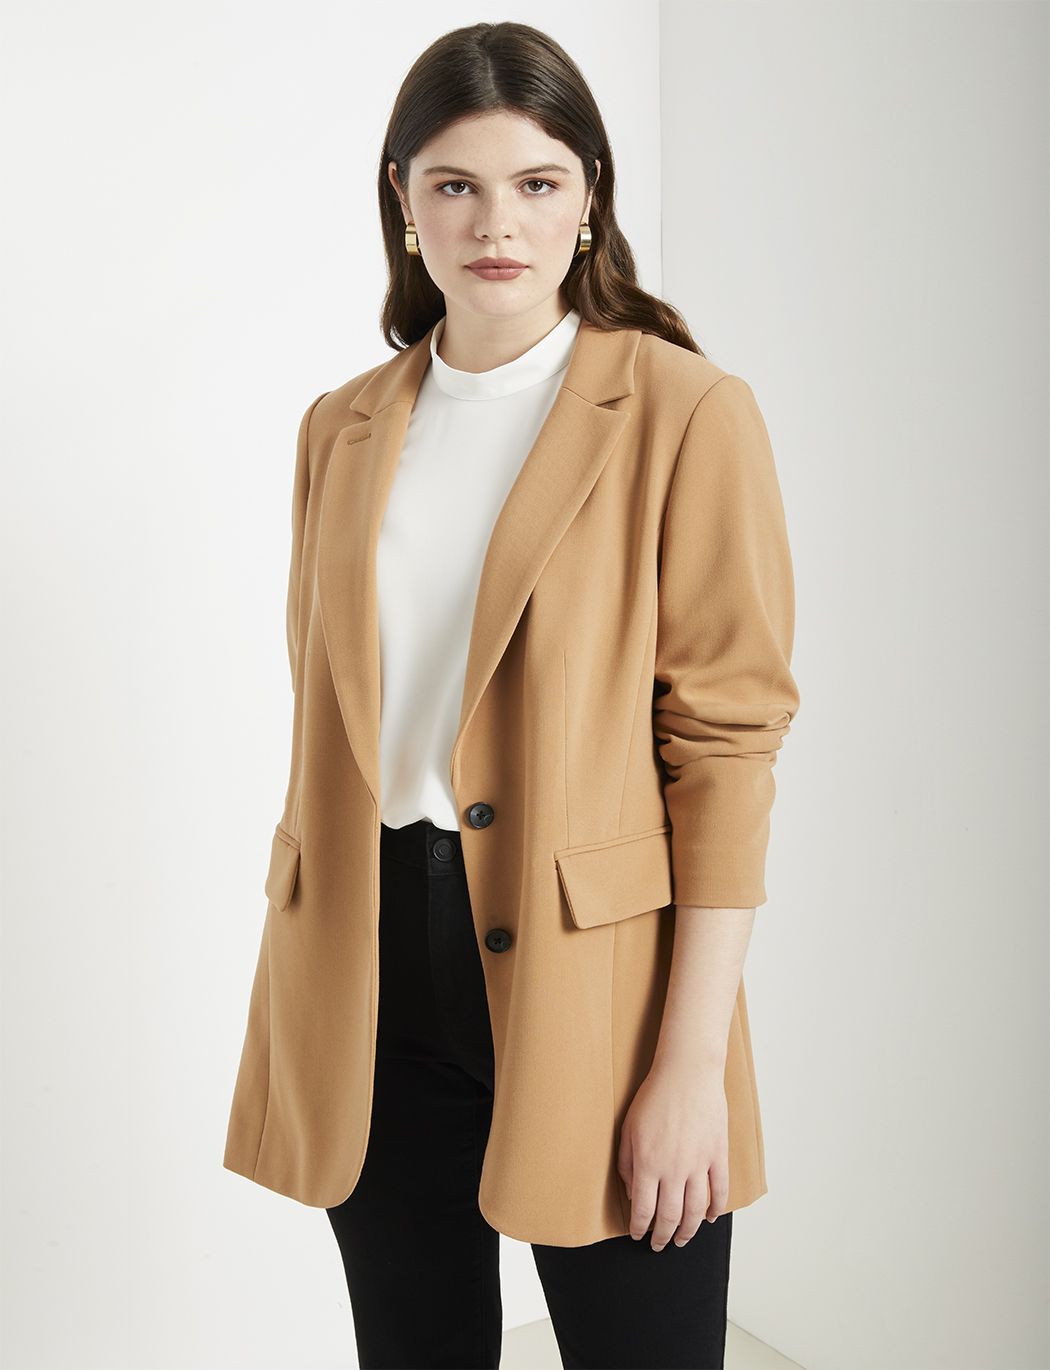 The 365 Suit Long Tailored Blazer | Eloquii